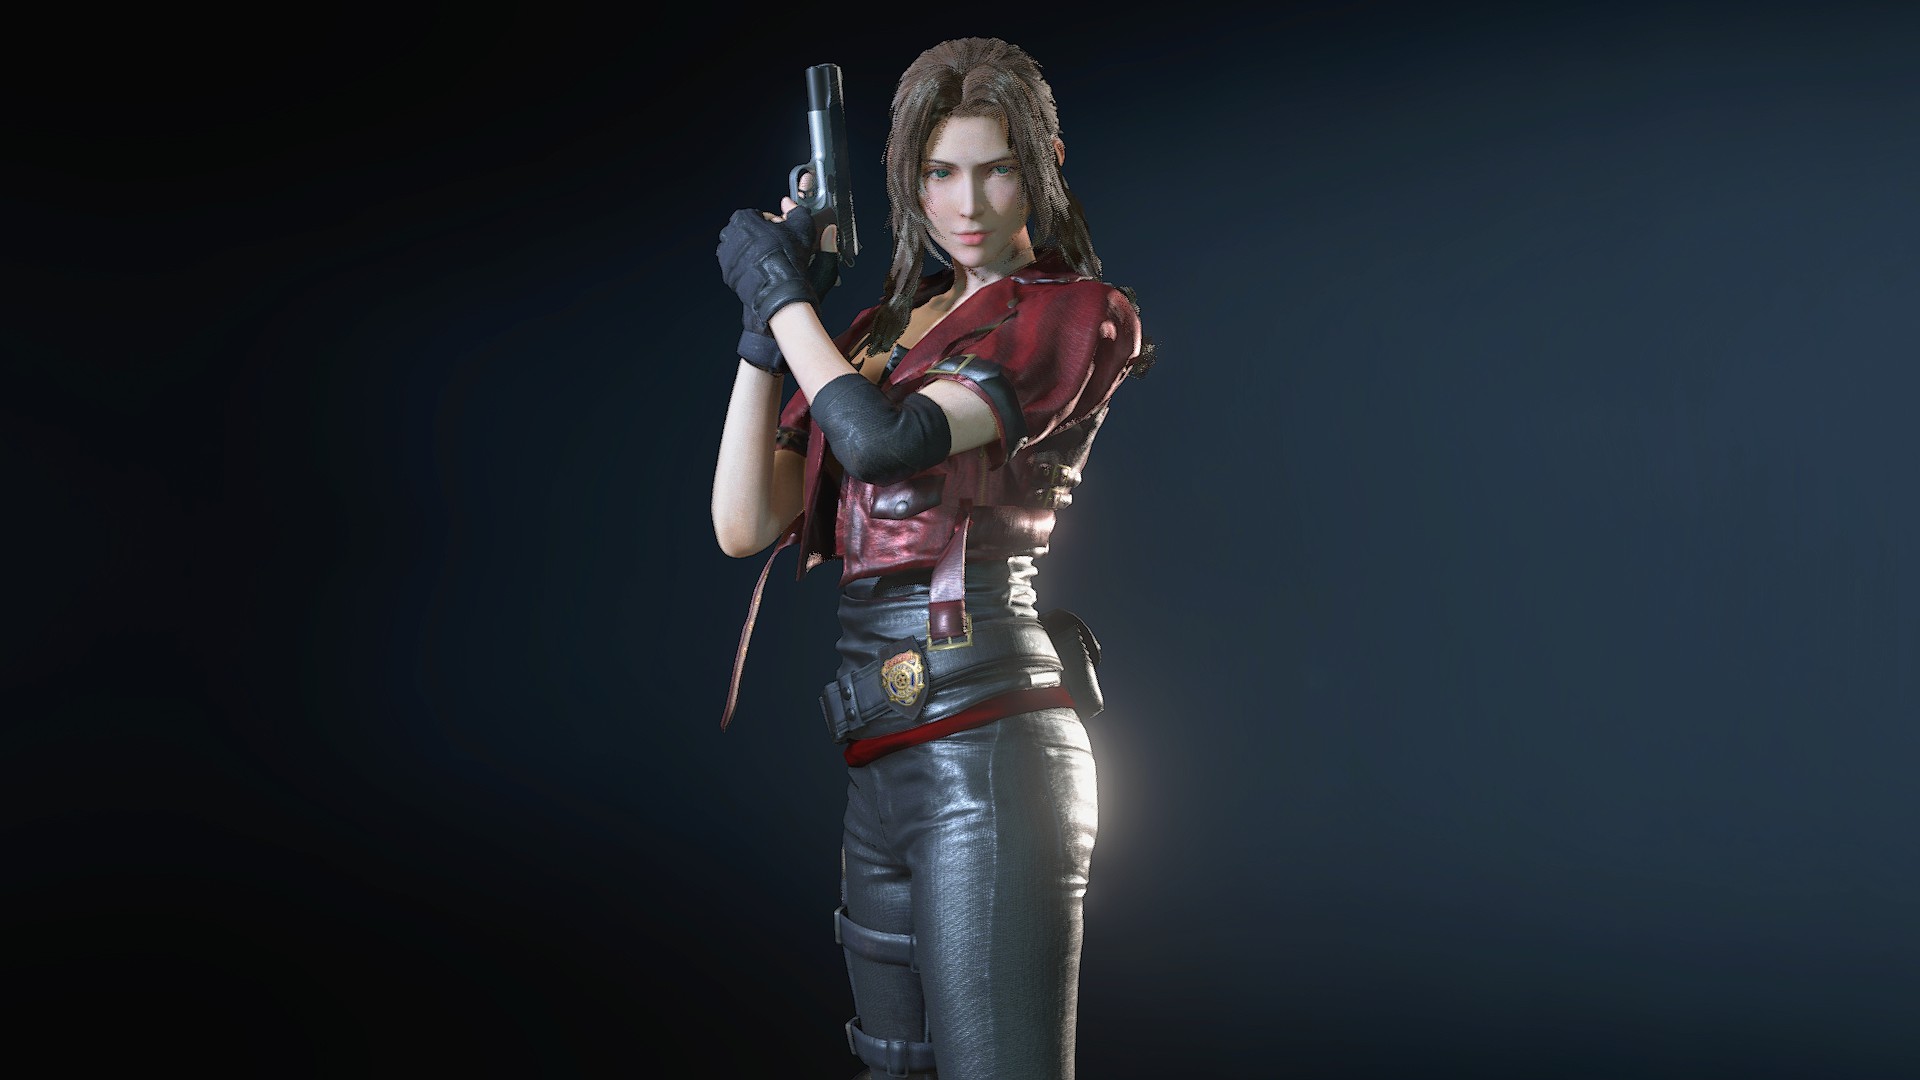 You can now play as Aerith from Final Fantasy 7 Remake in Resident